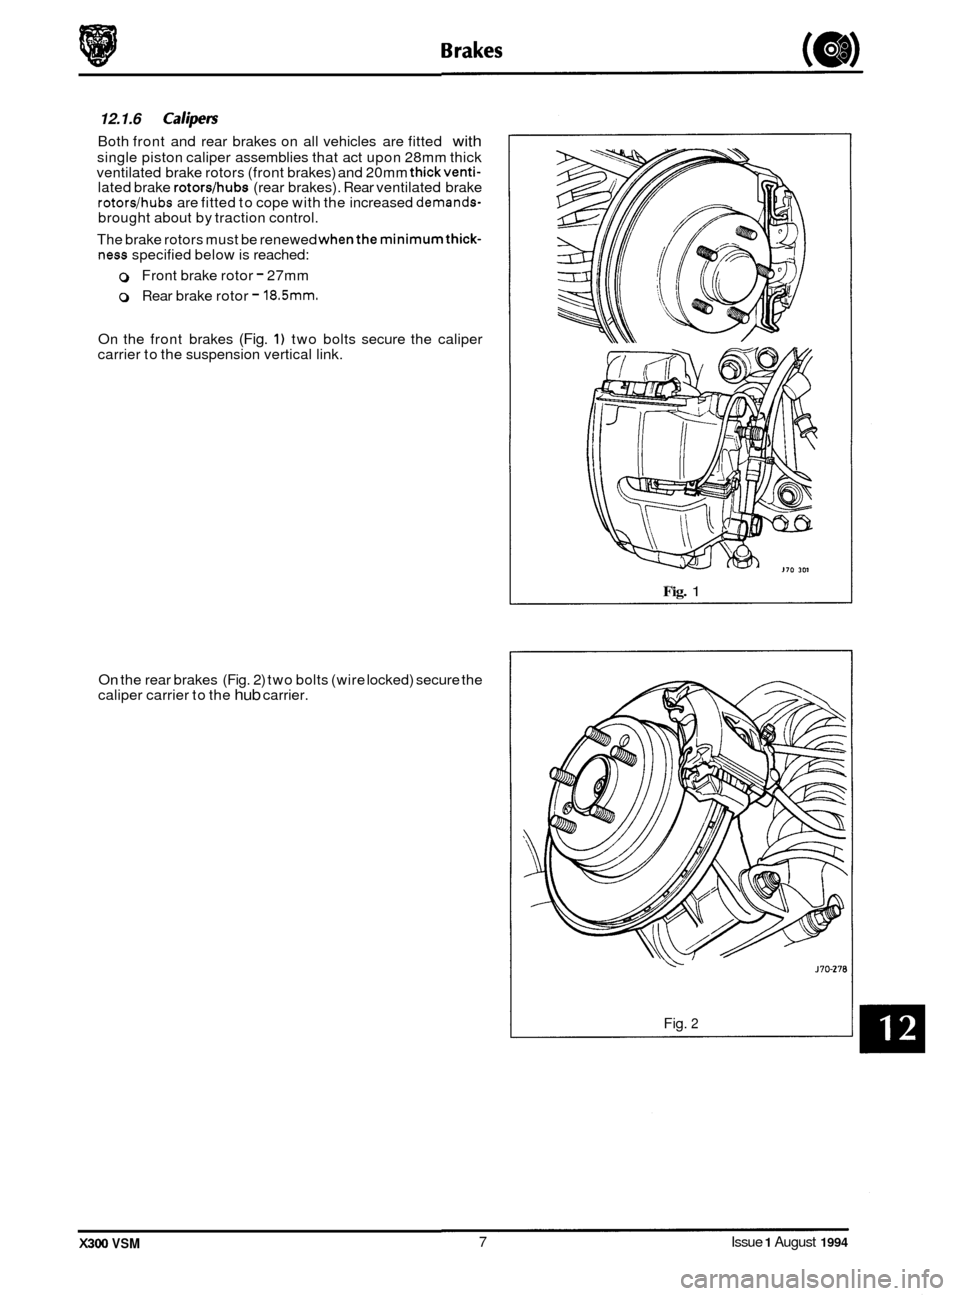 JAGUAR XJ6 1994 2.G Workshop Manual 0 12.1.6 Calipers 
Both front  and rear  brakes  on all vehicles  are  fitted with 
single piston  caliper assemblies  that act upon  28mm thick 
ventilated  brake rotors (front  brakes) and 20mm thic